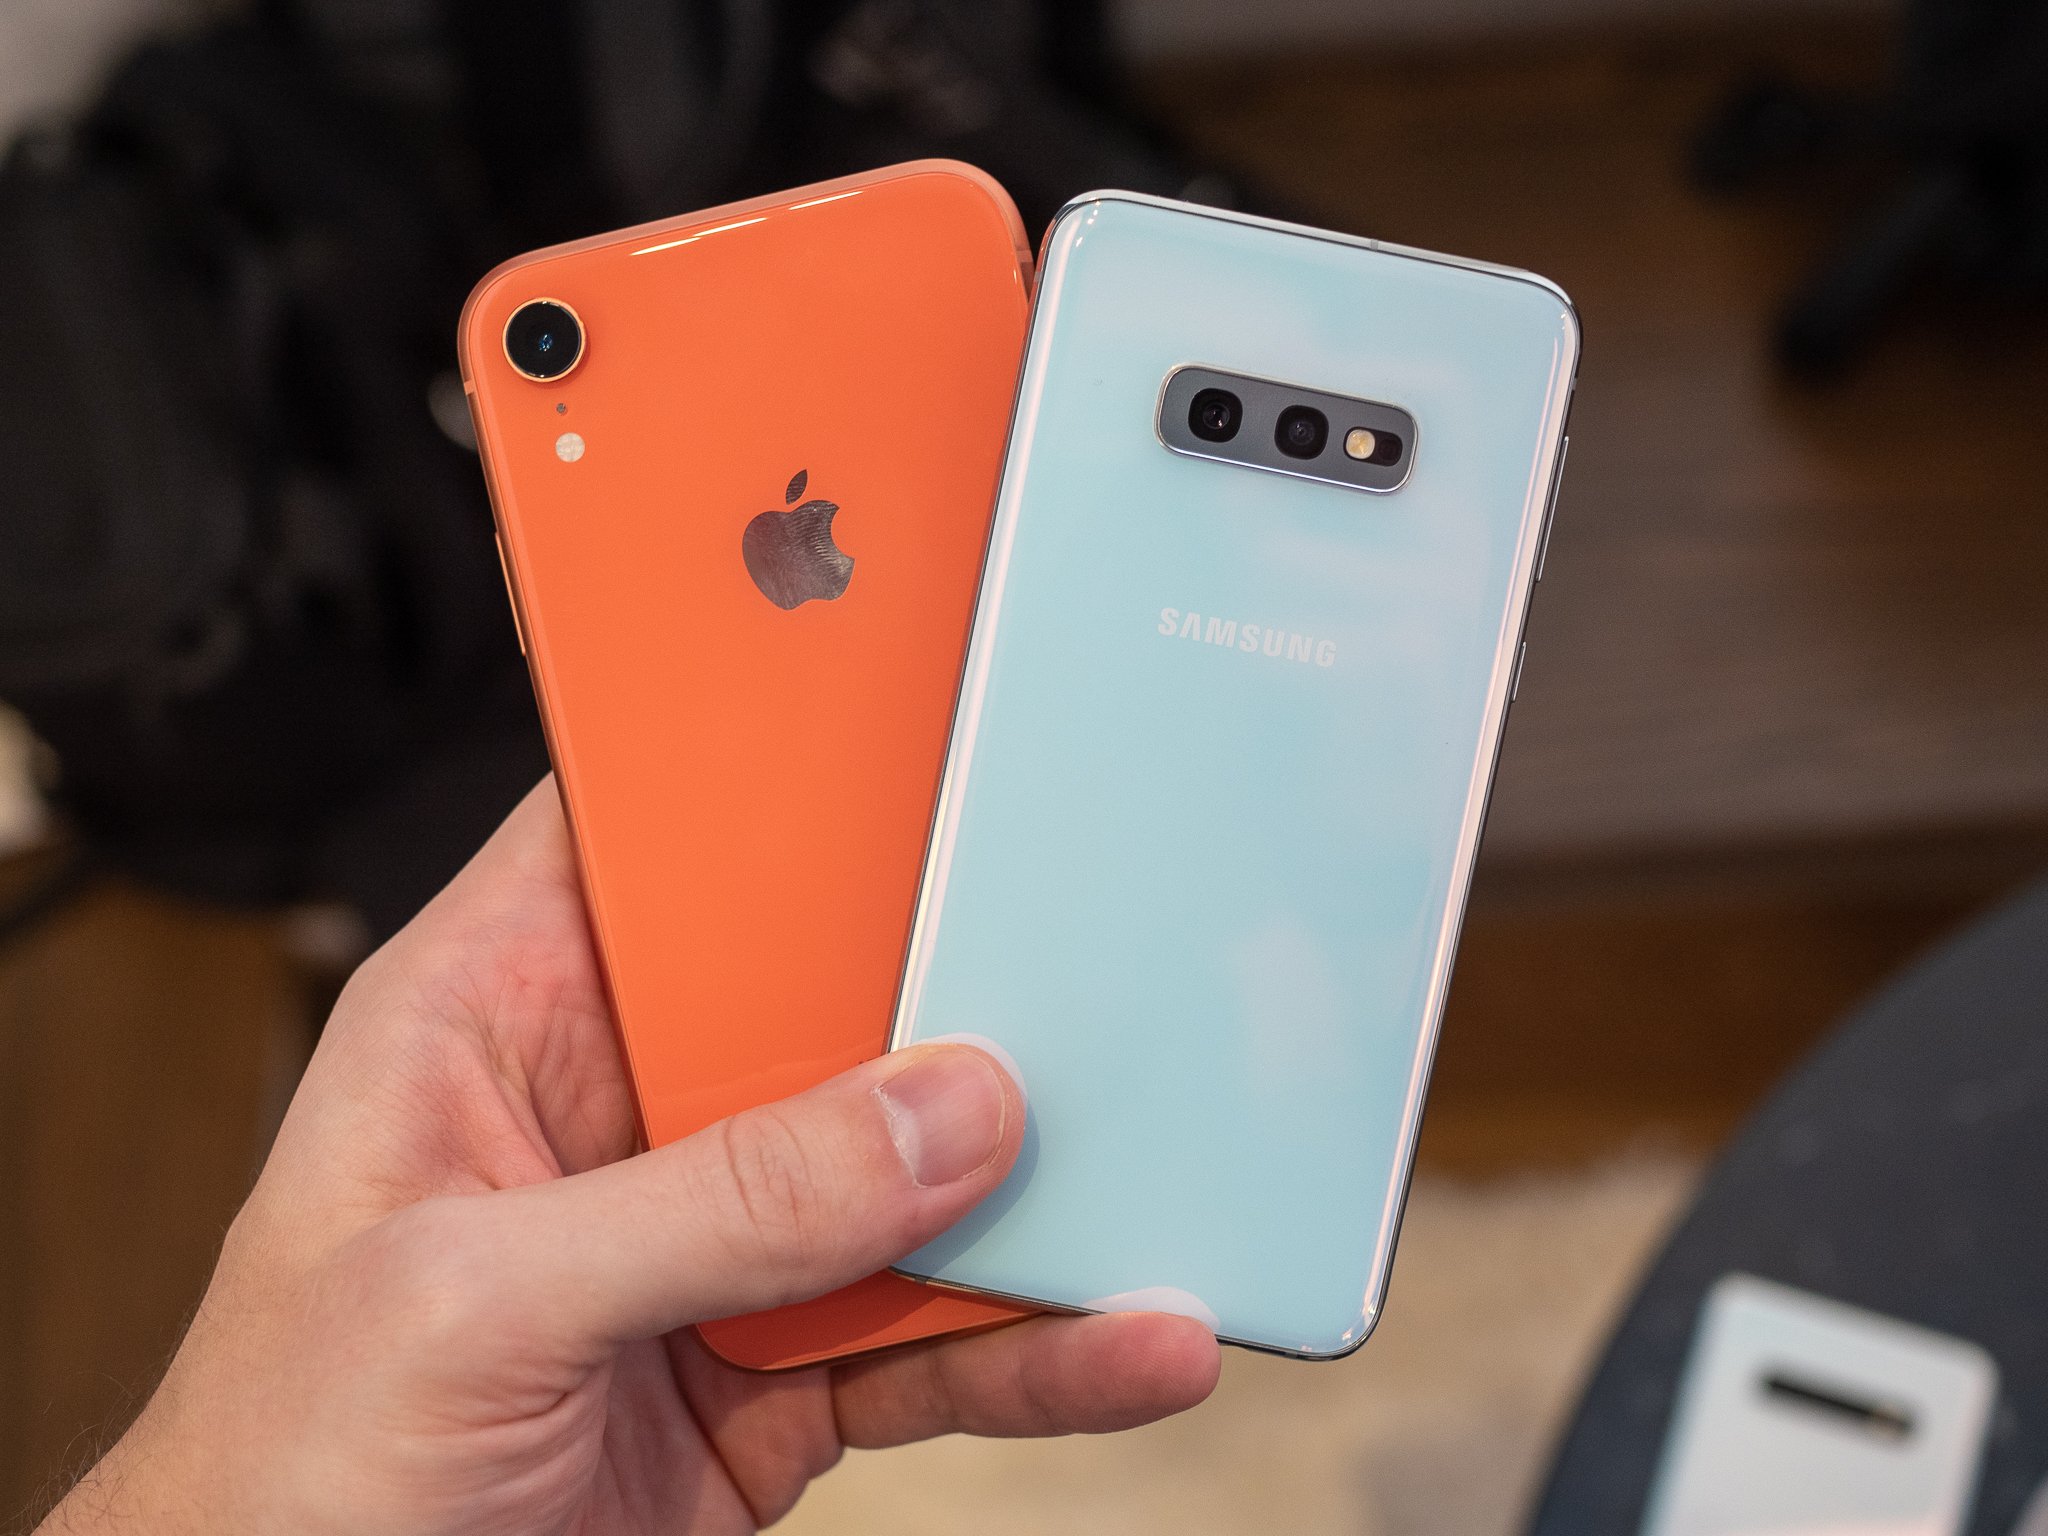 should i buy the iphone xr